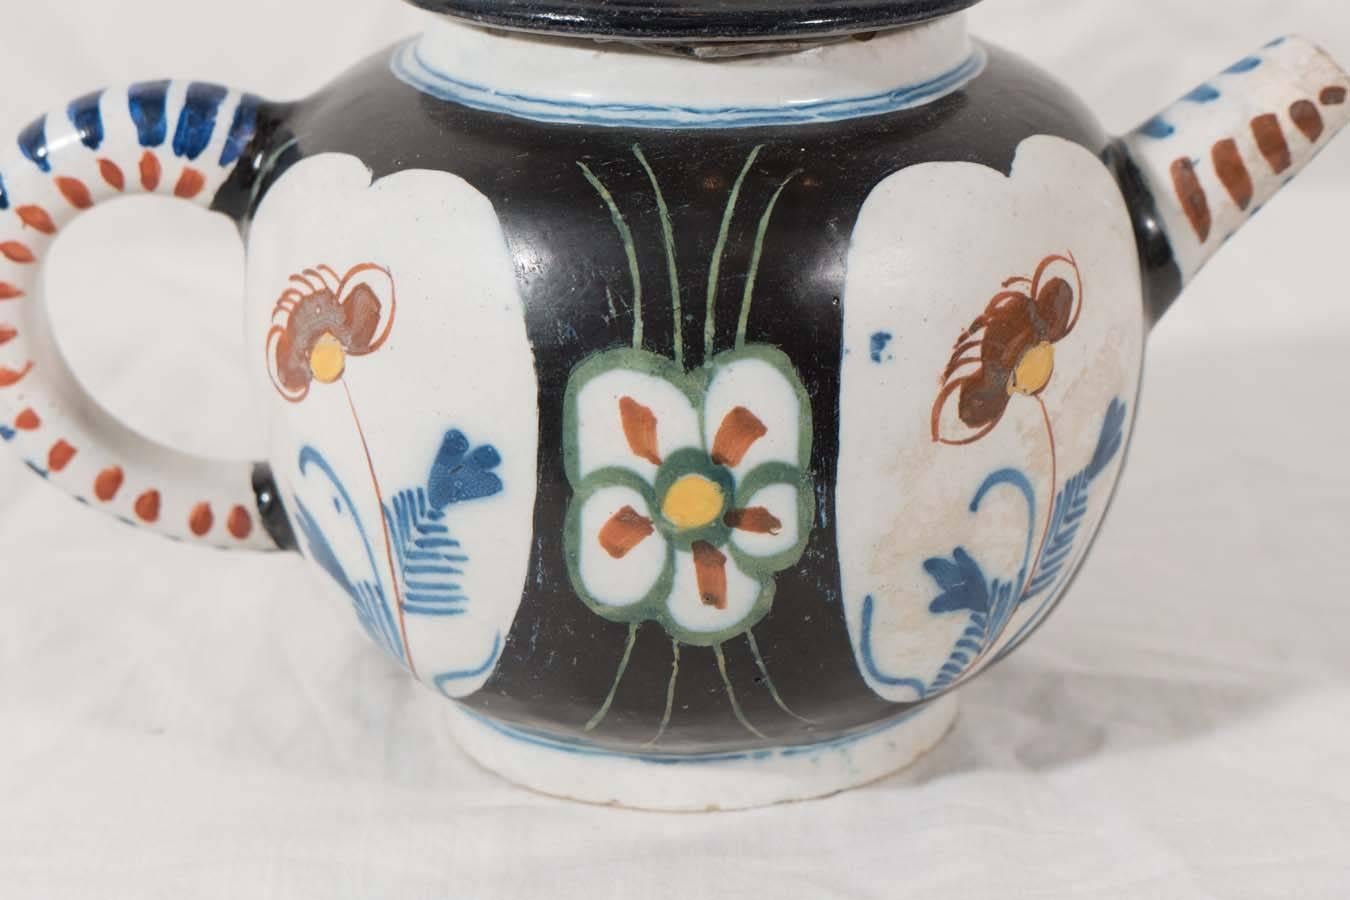 A small decorative Dutch Delft teapot with rare black tin-glaze and painted polychrome floral decoration, the handle and spout decorated with dashes. The teapot in a traditional Chinese form. The spout shortened in the Dutch fashion.
 The